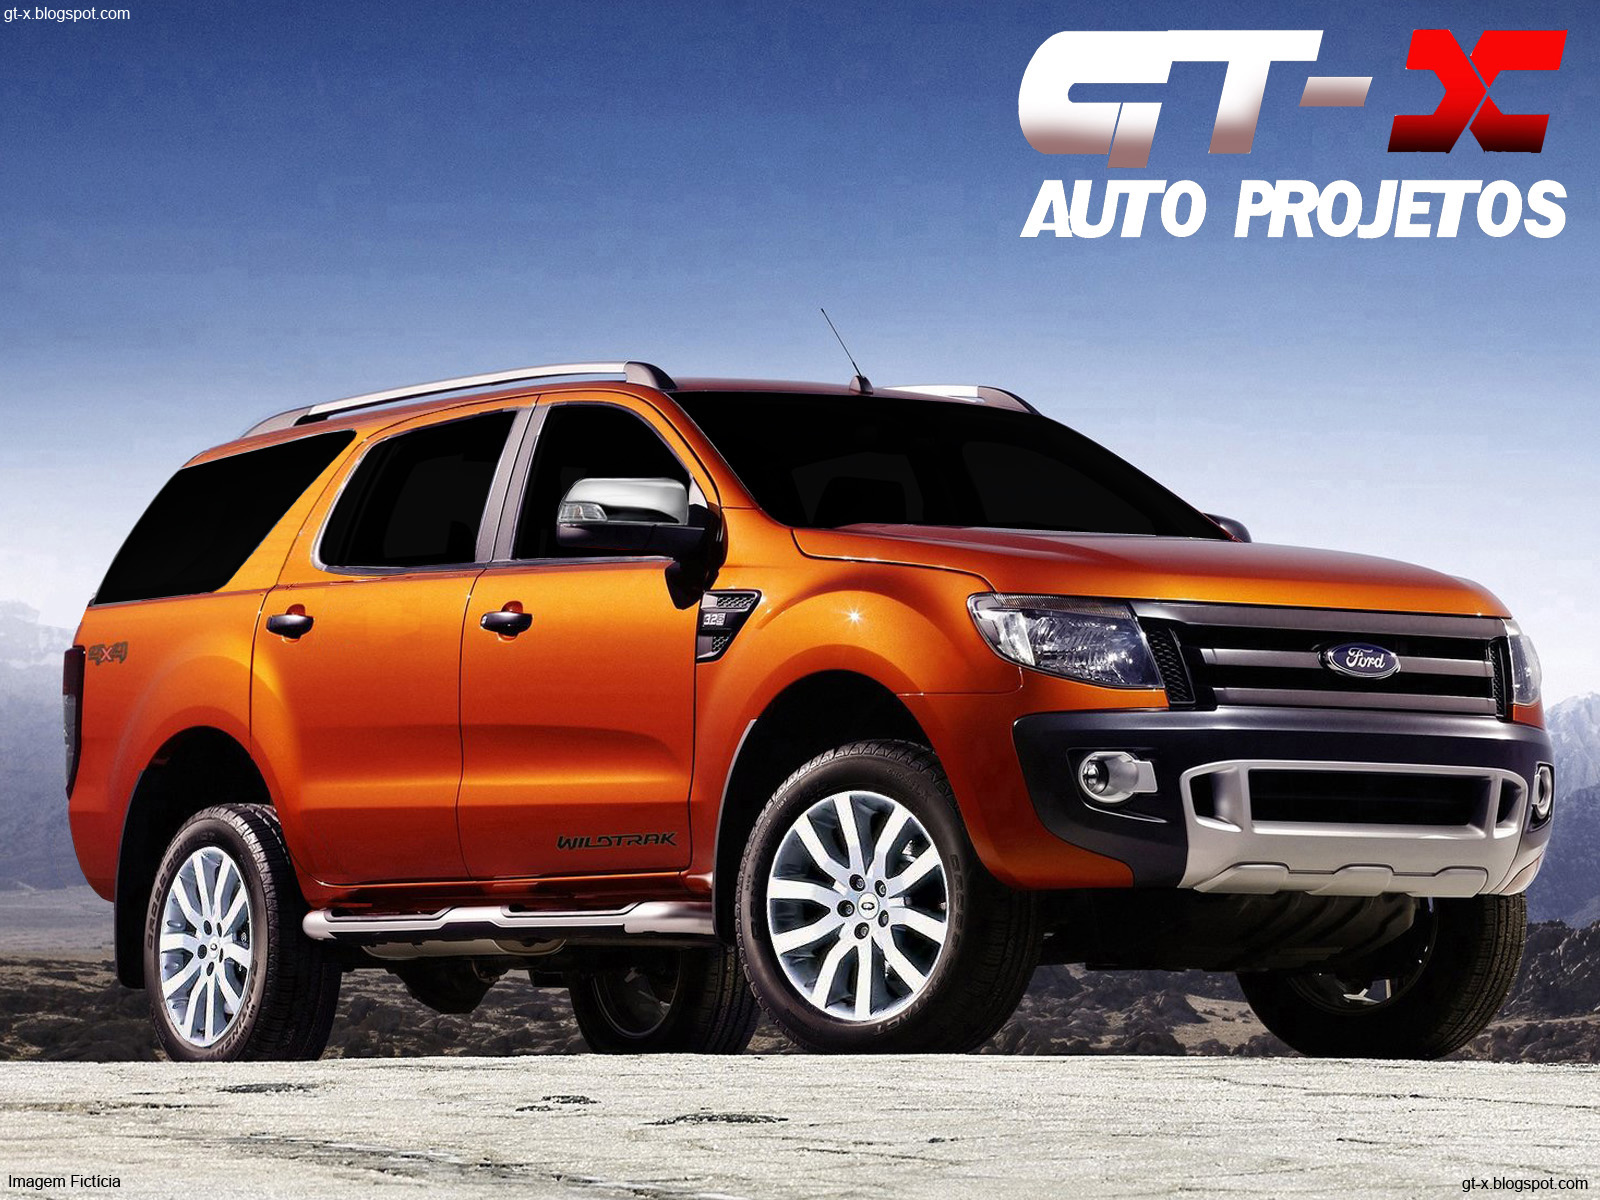 The new ford everest 2014 #3